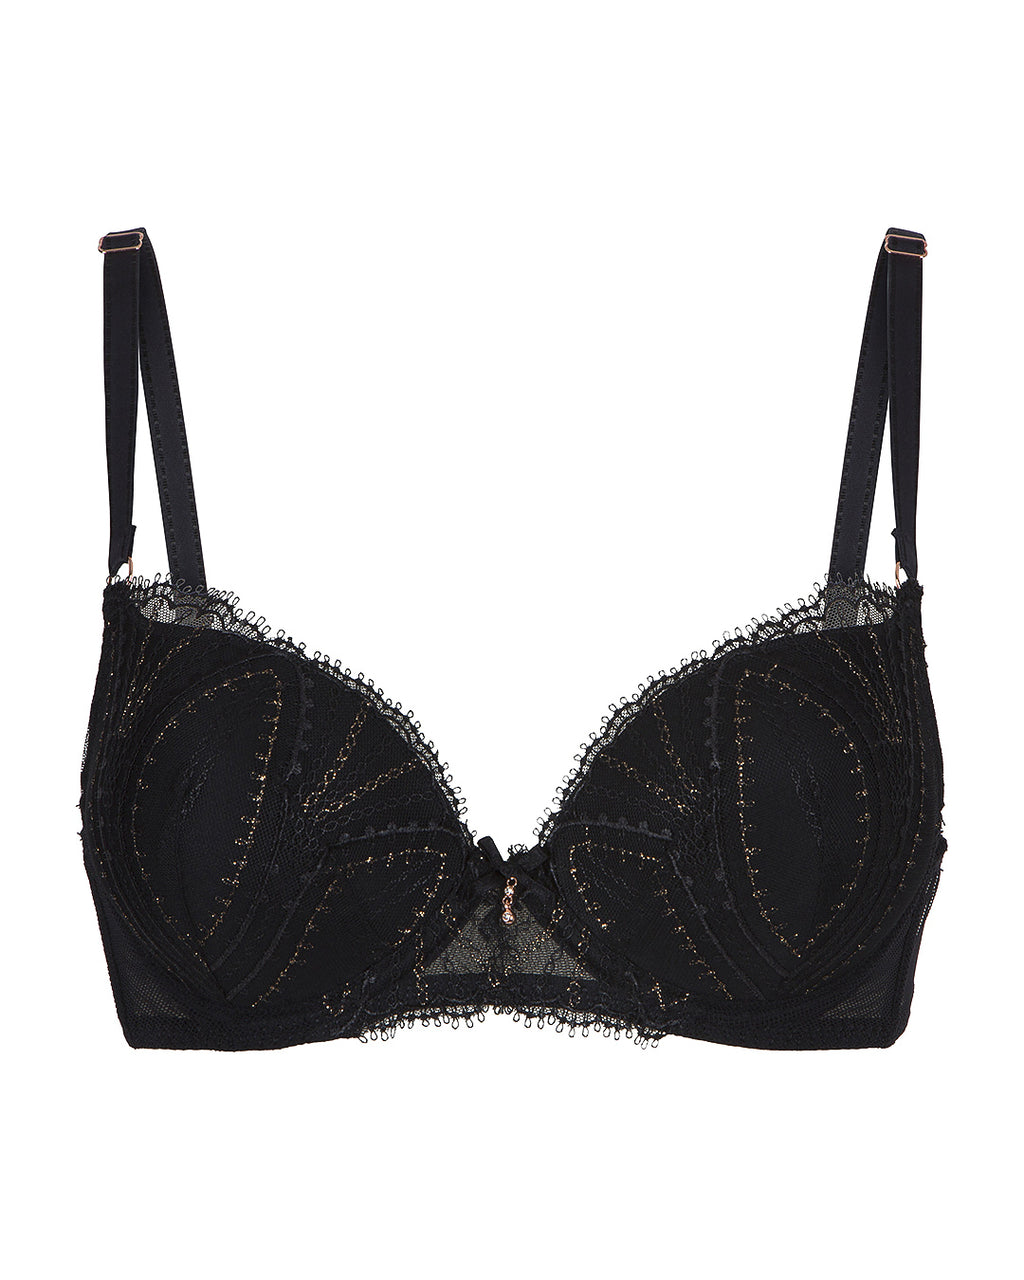 EVERYDAY LUXE – Specialty Fittings Lingerie